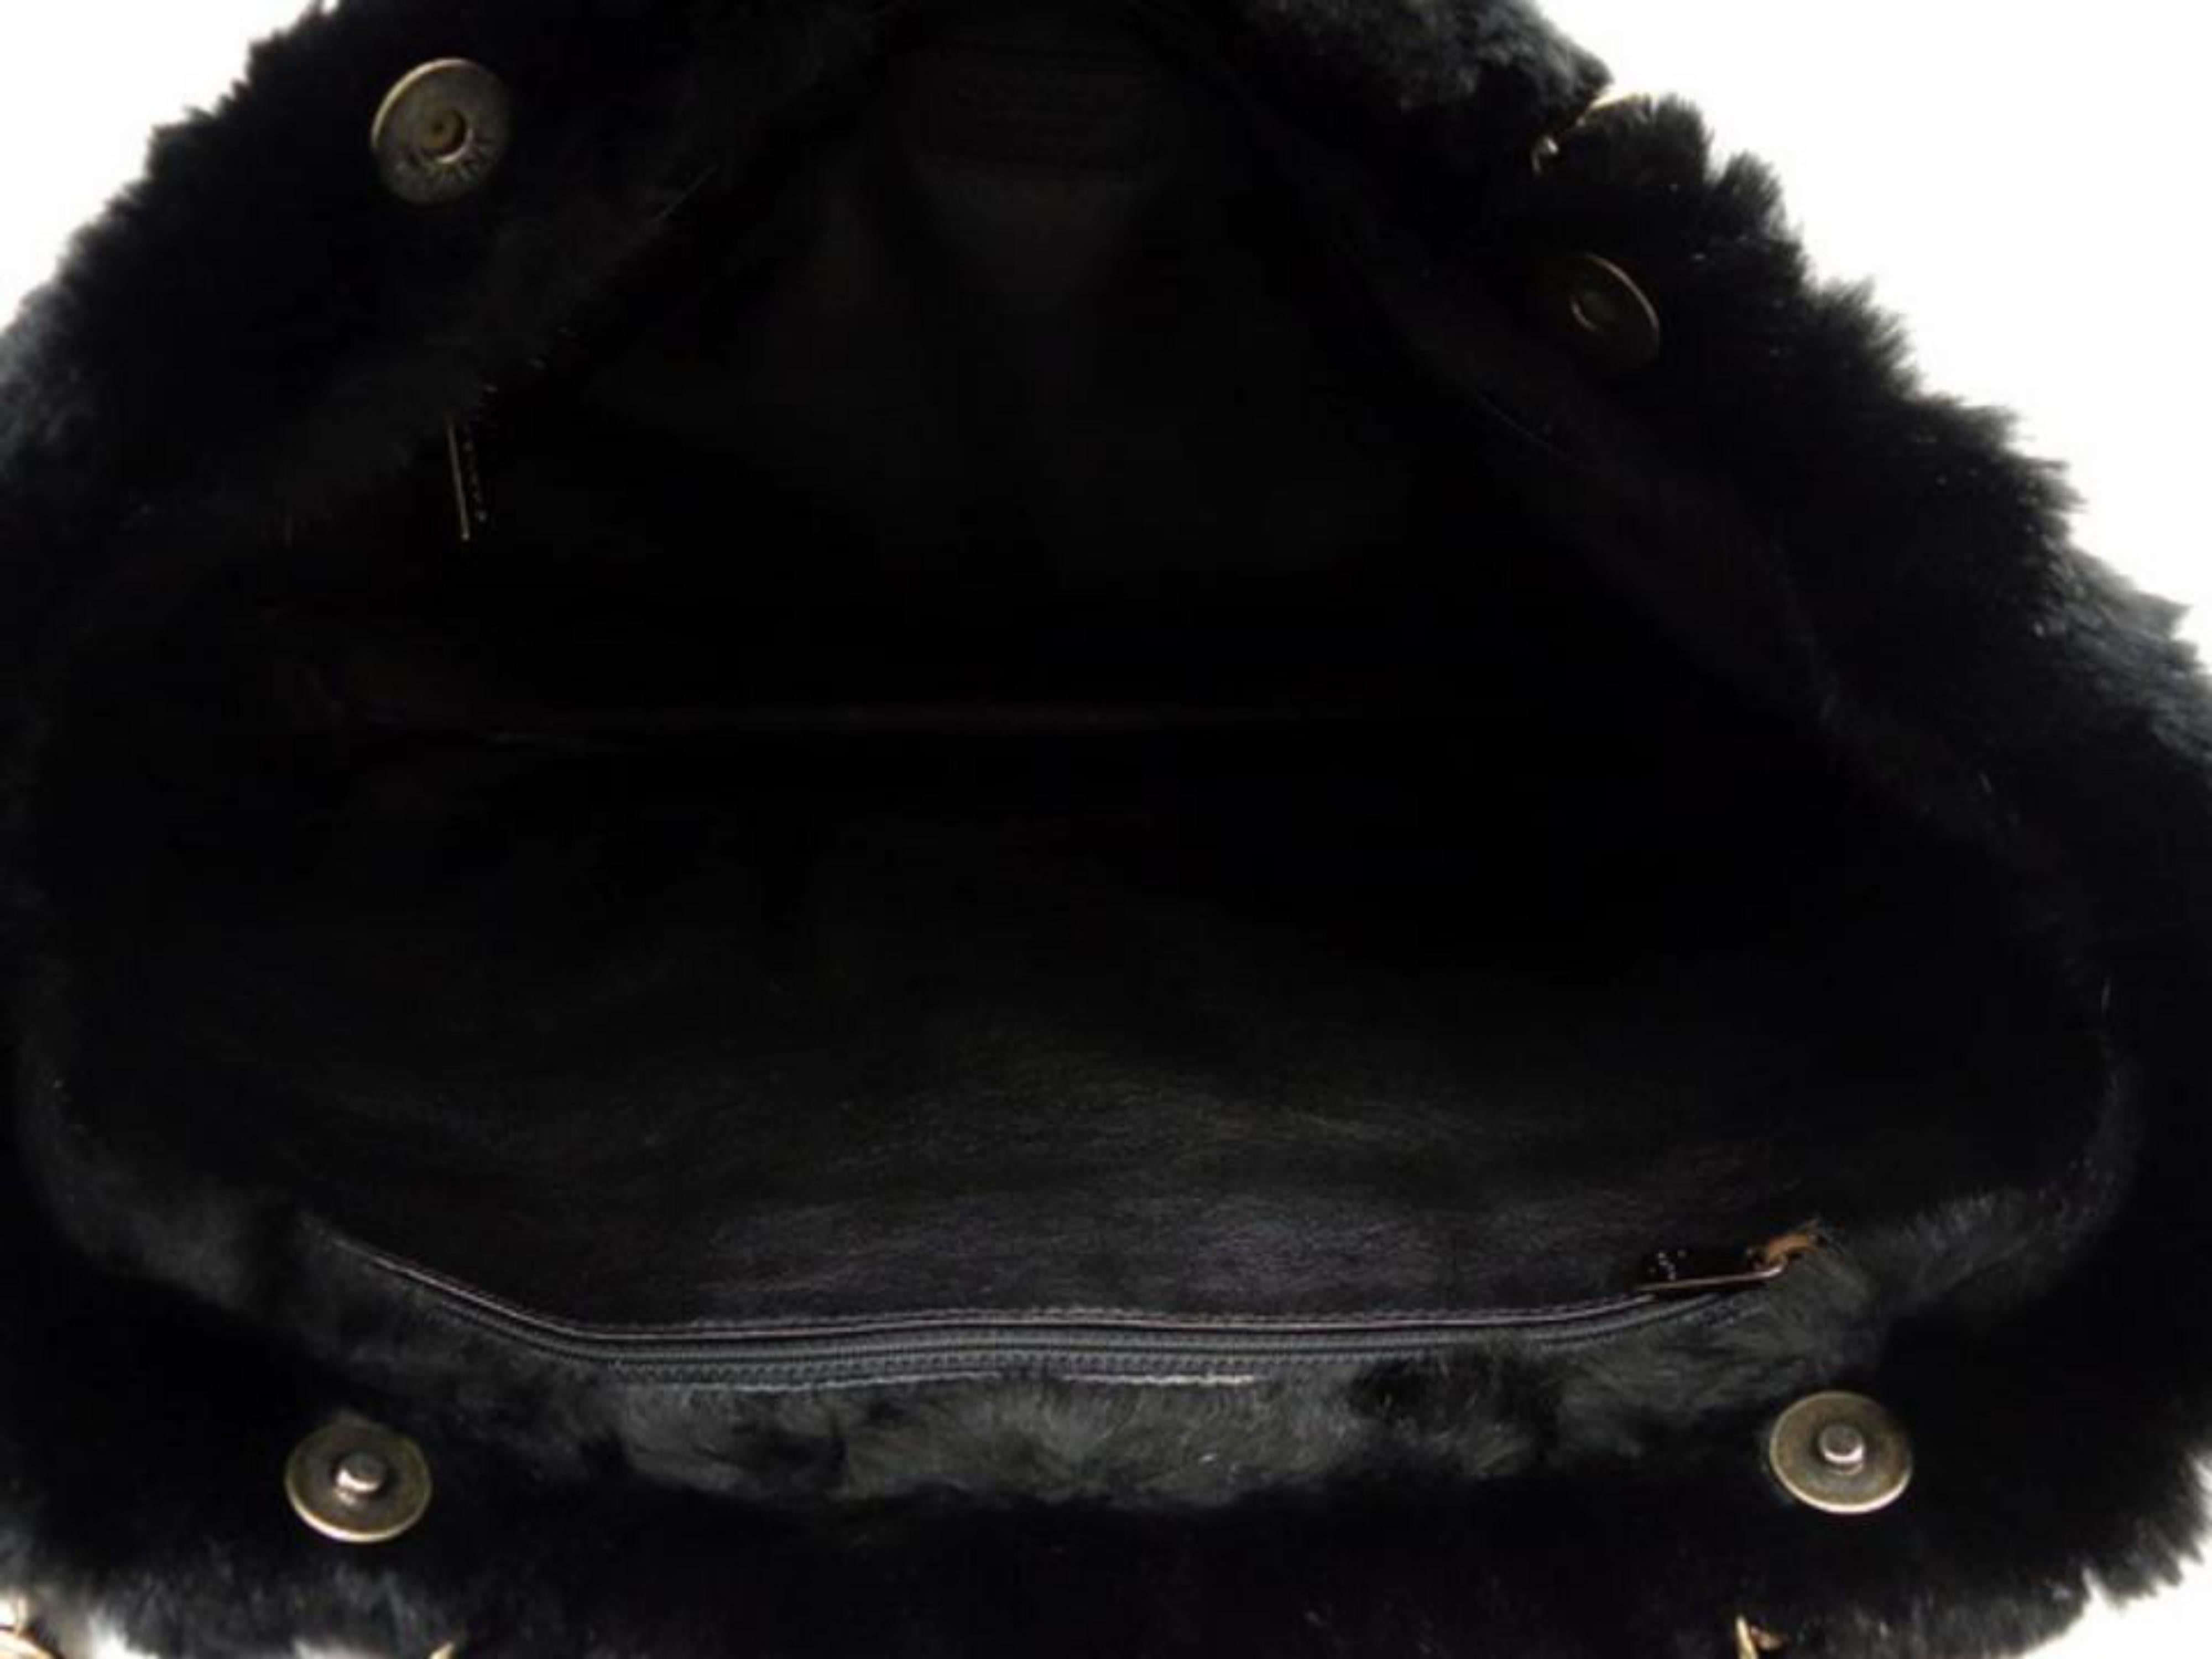 Chanel Cc Chain Tote 227177 Black Rabbit Fur Shoulder Bag In Good Condition For Sale In Forest Hills, NY